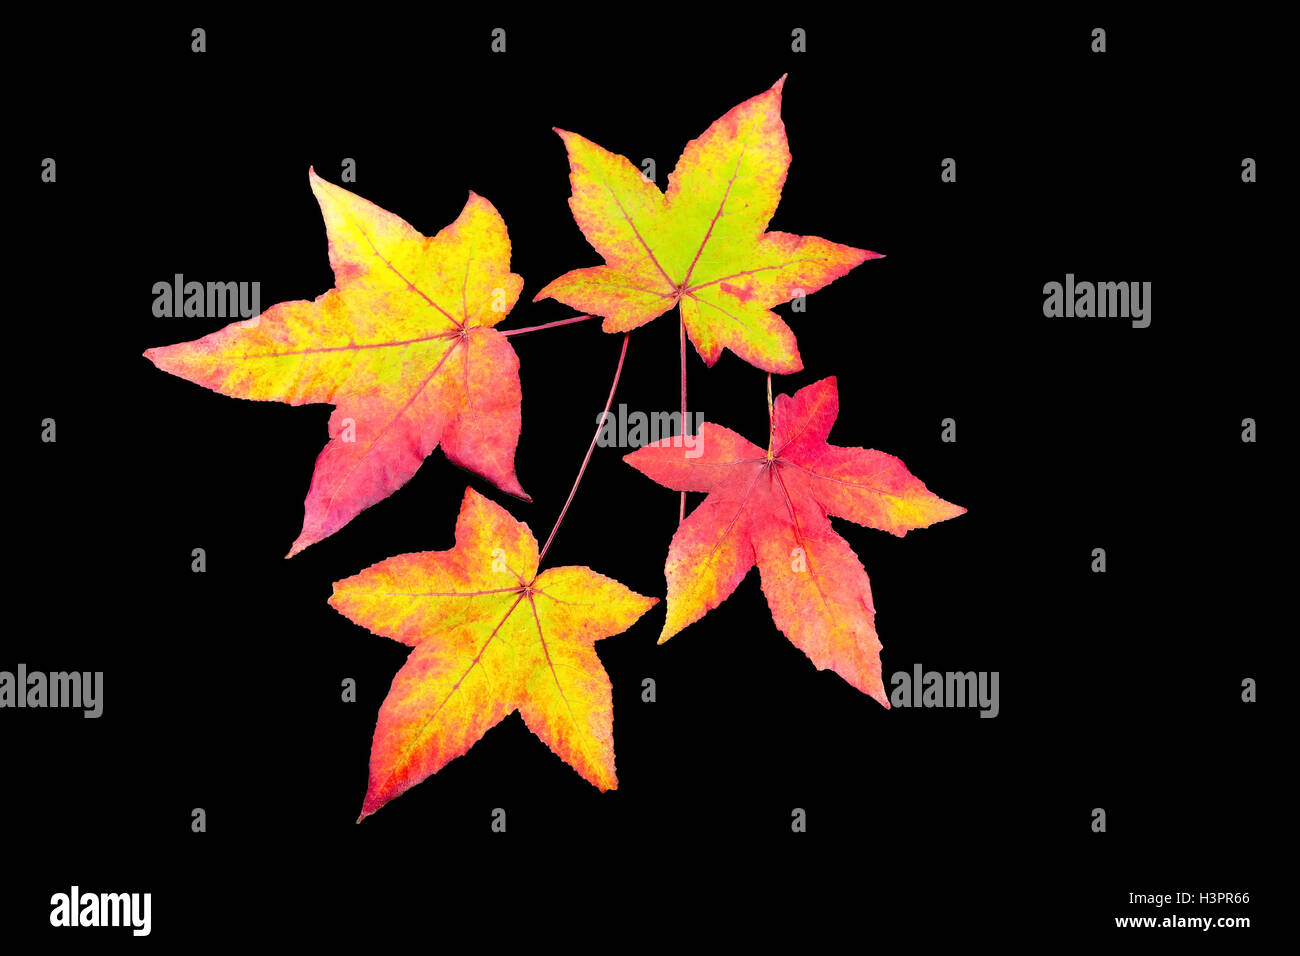 Four colored fall  leaves isolated on black background Stock Photo